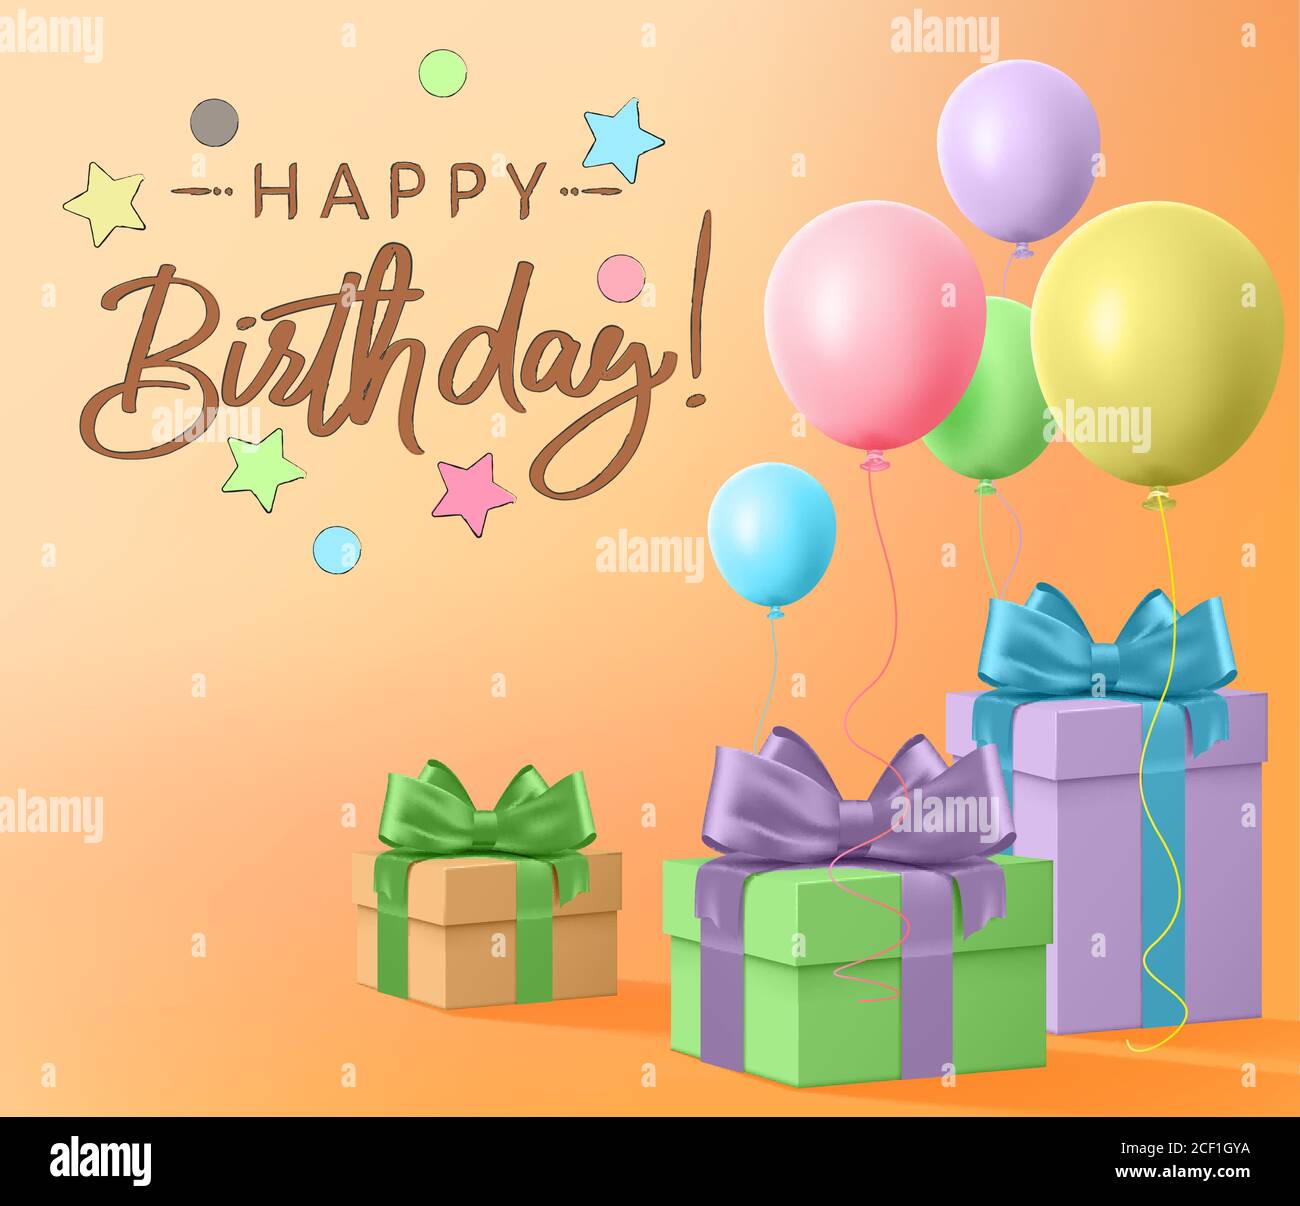 Happy birthday vector template design. Birthday greeting text with ...